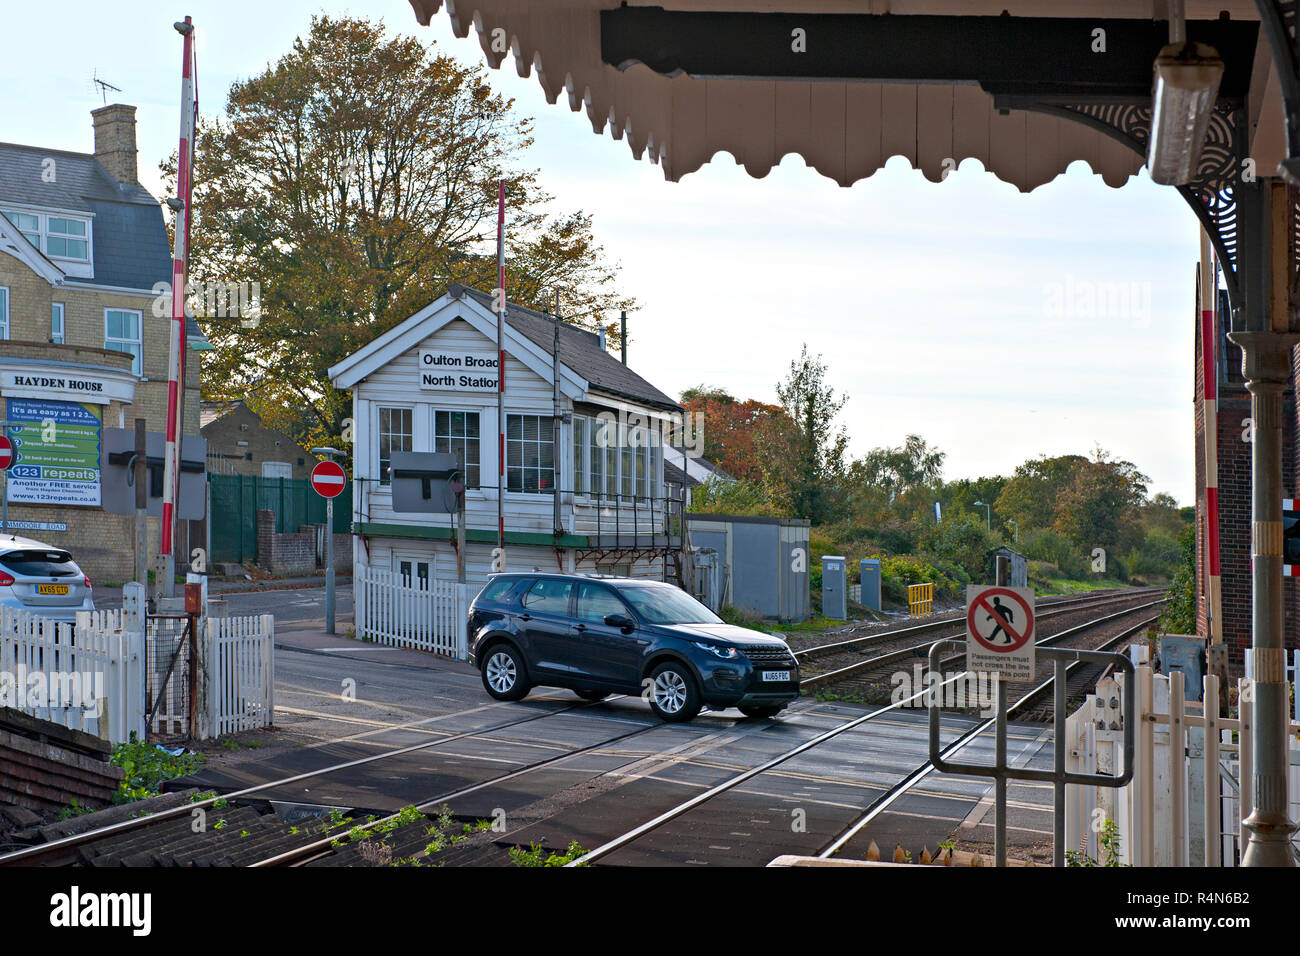 Oulton Broad North Signal Box and crossing, Suffolk, Barriers are up to allow road traffic to cross. Stock Photo